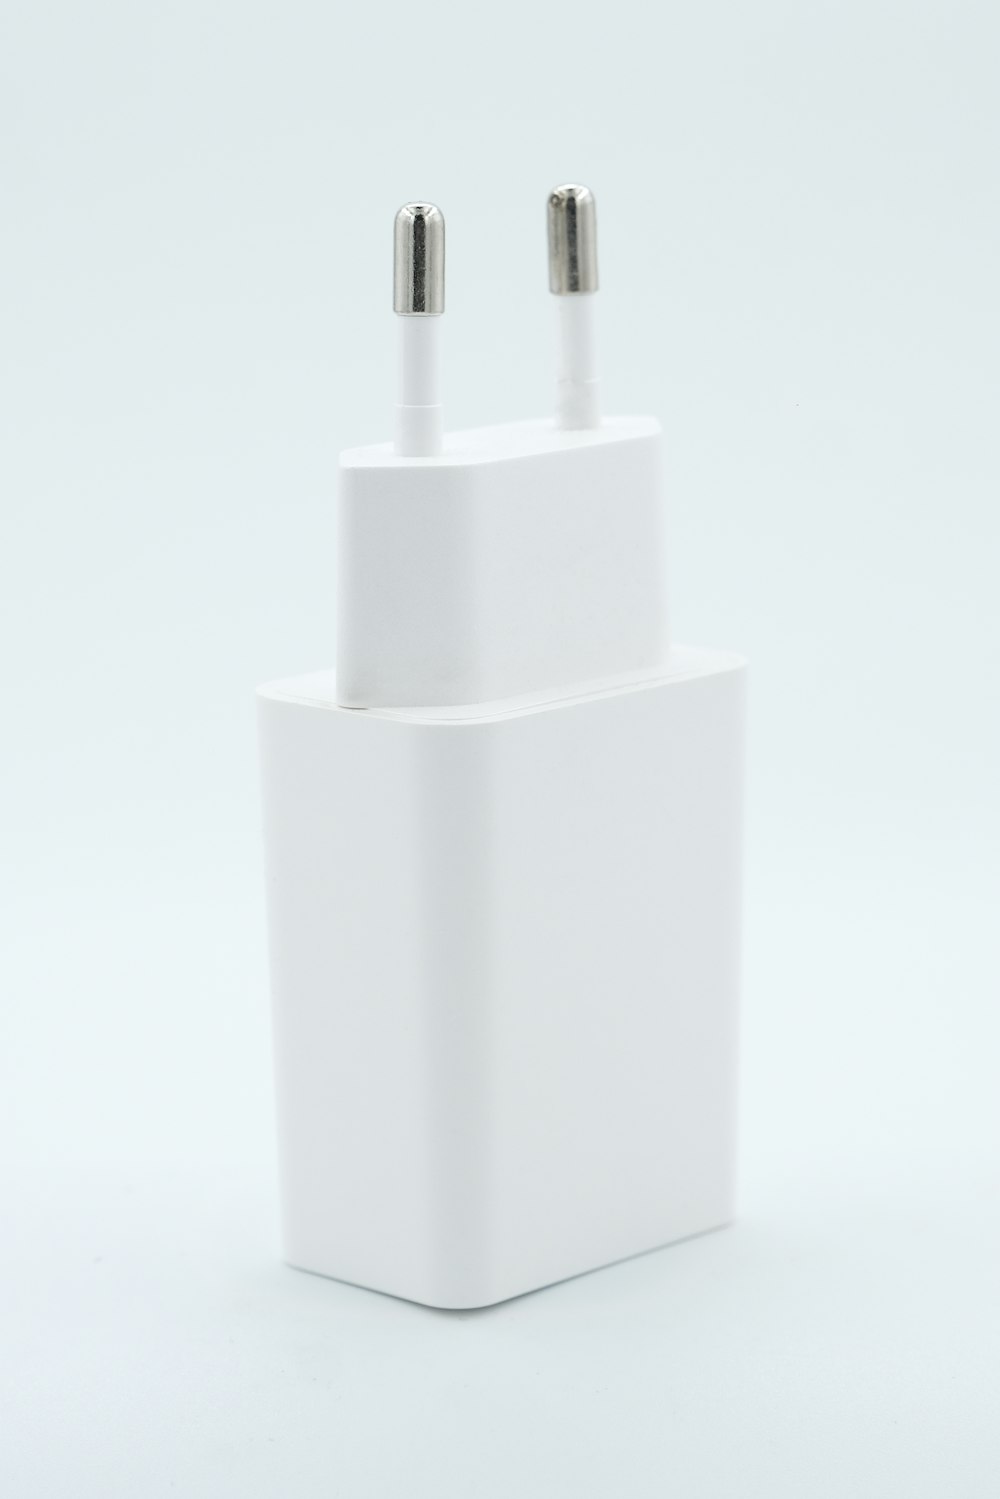 a close up of an apple charger with two plugs